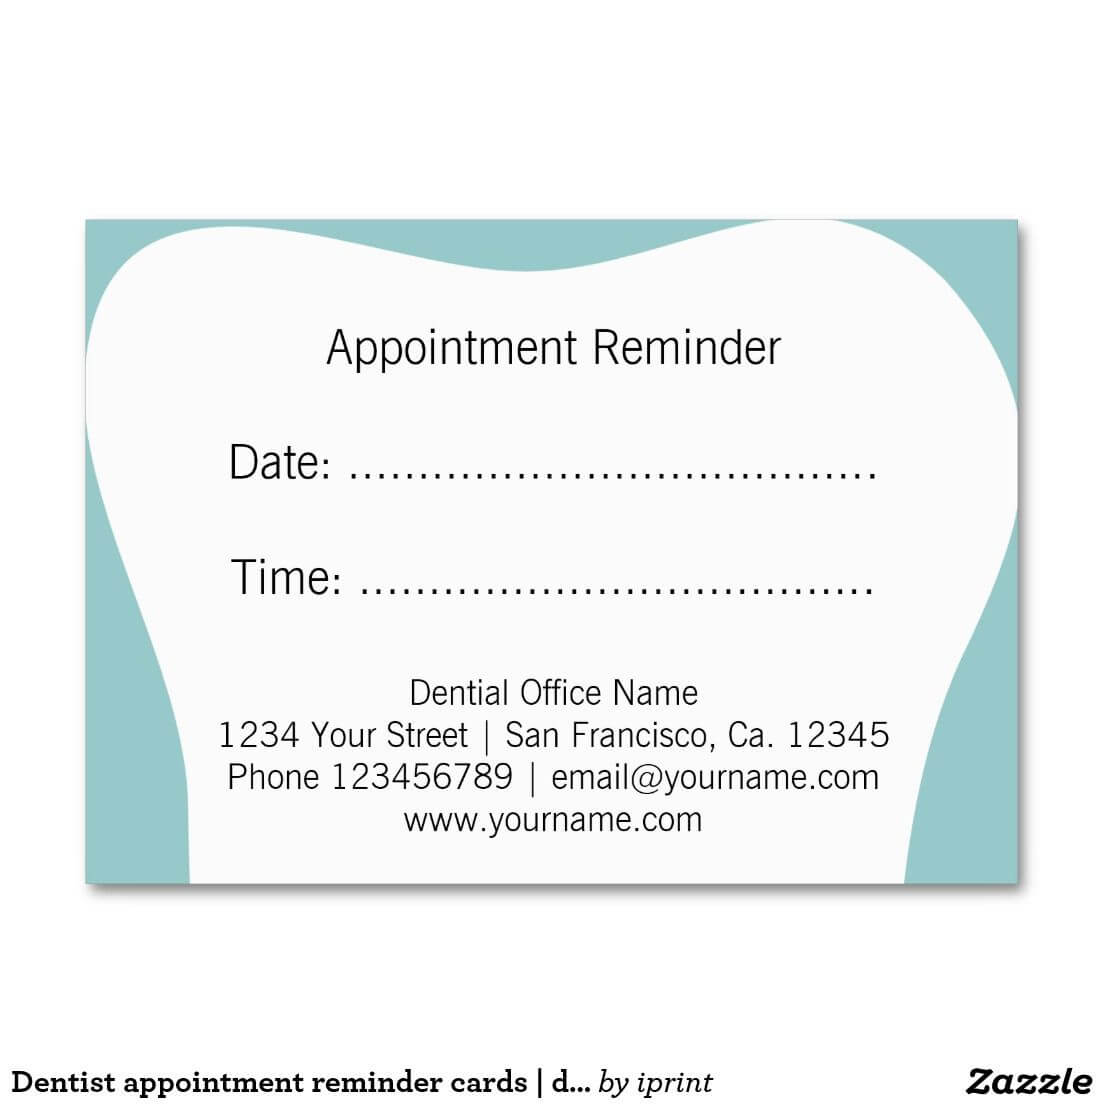 Create Your Own Profile Card | Zazzle | Dental Business Inside Dentist Appointment Card Template